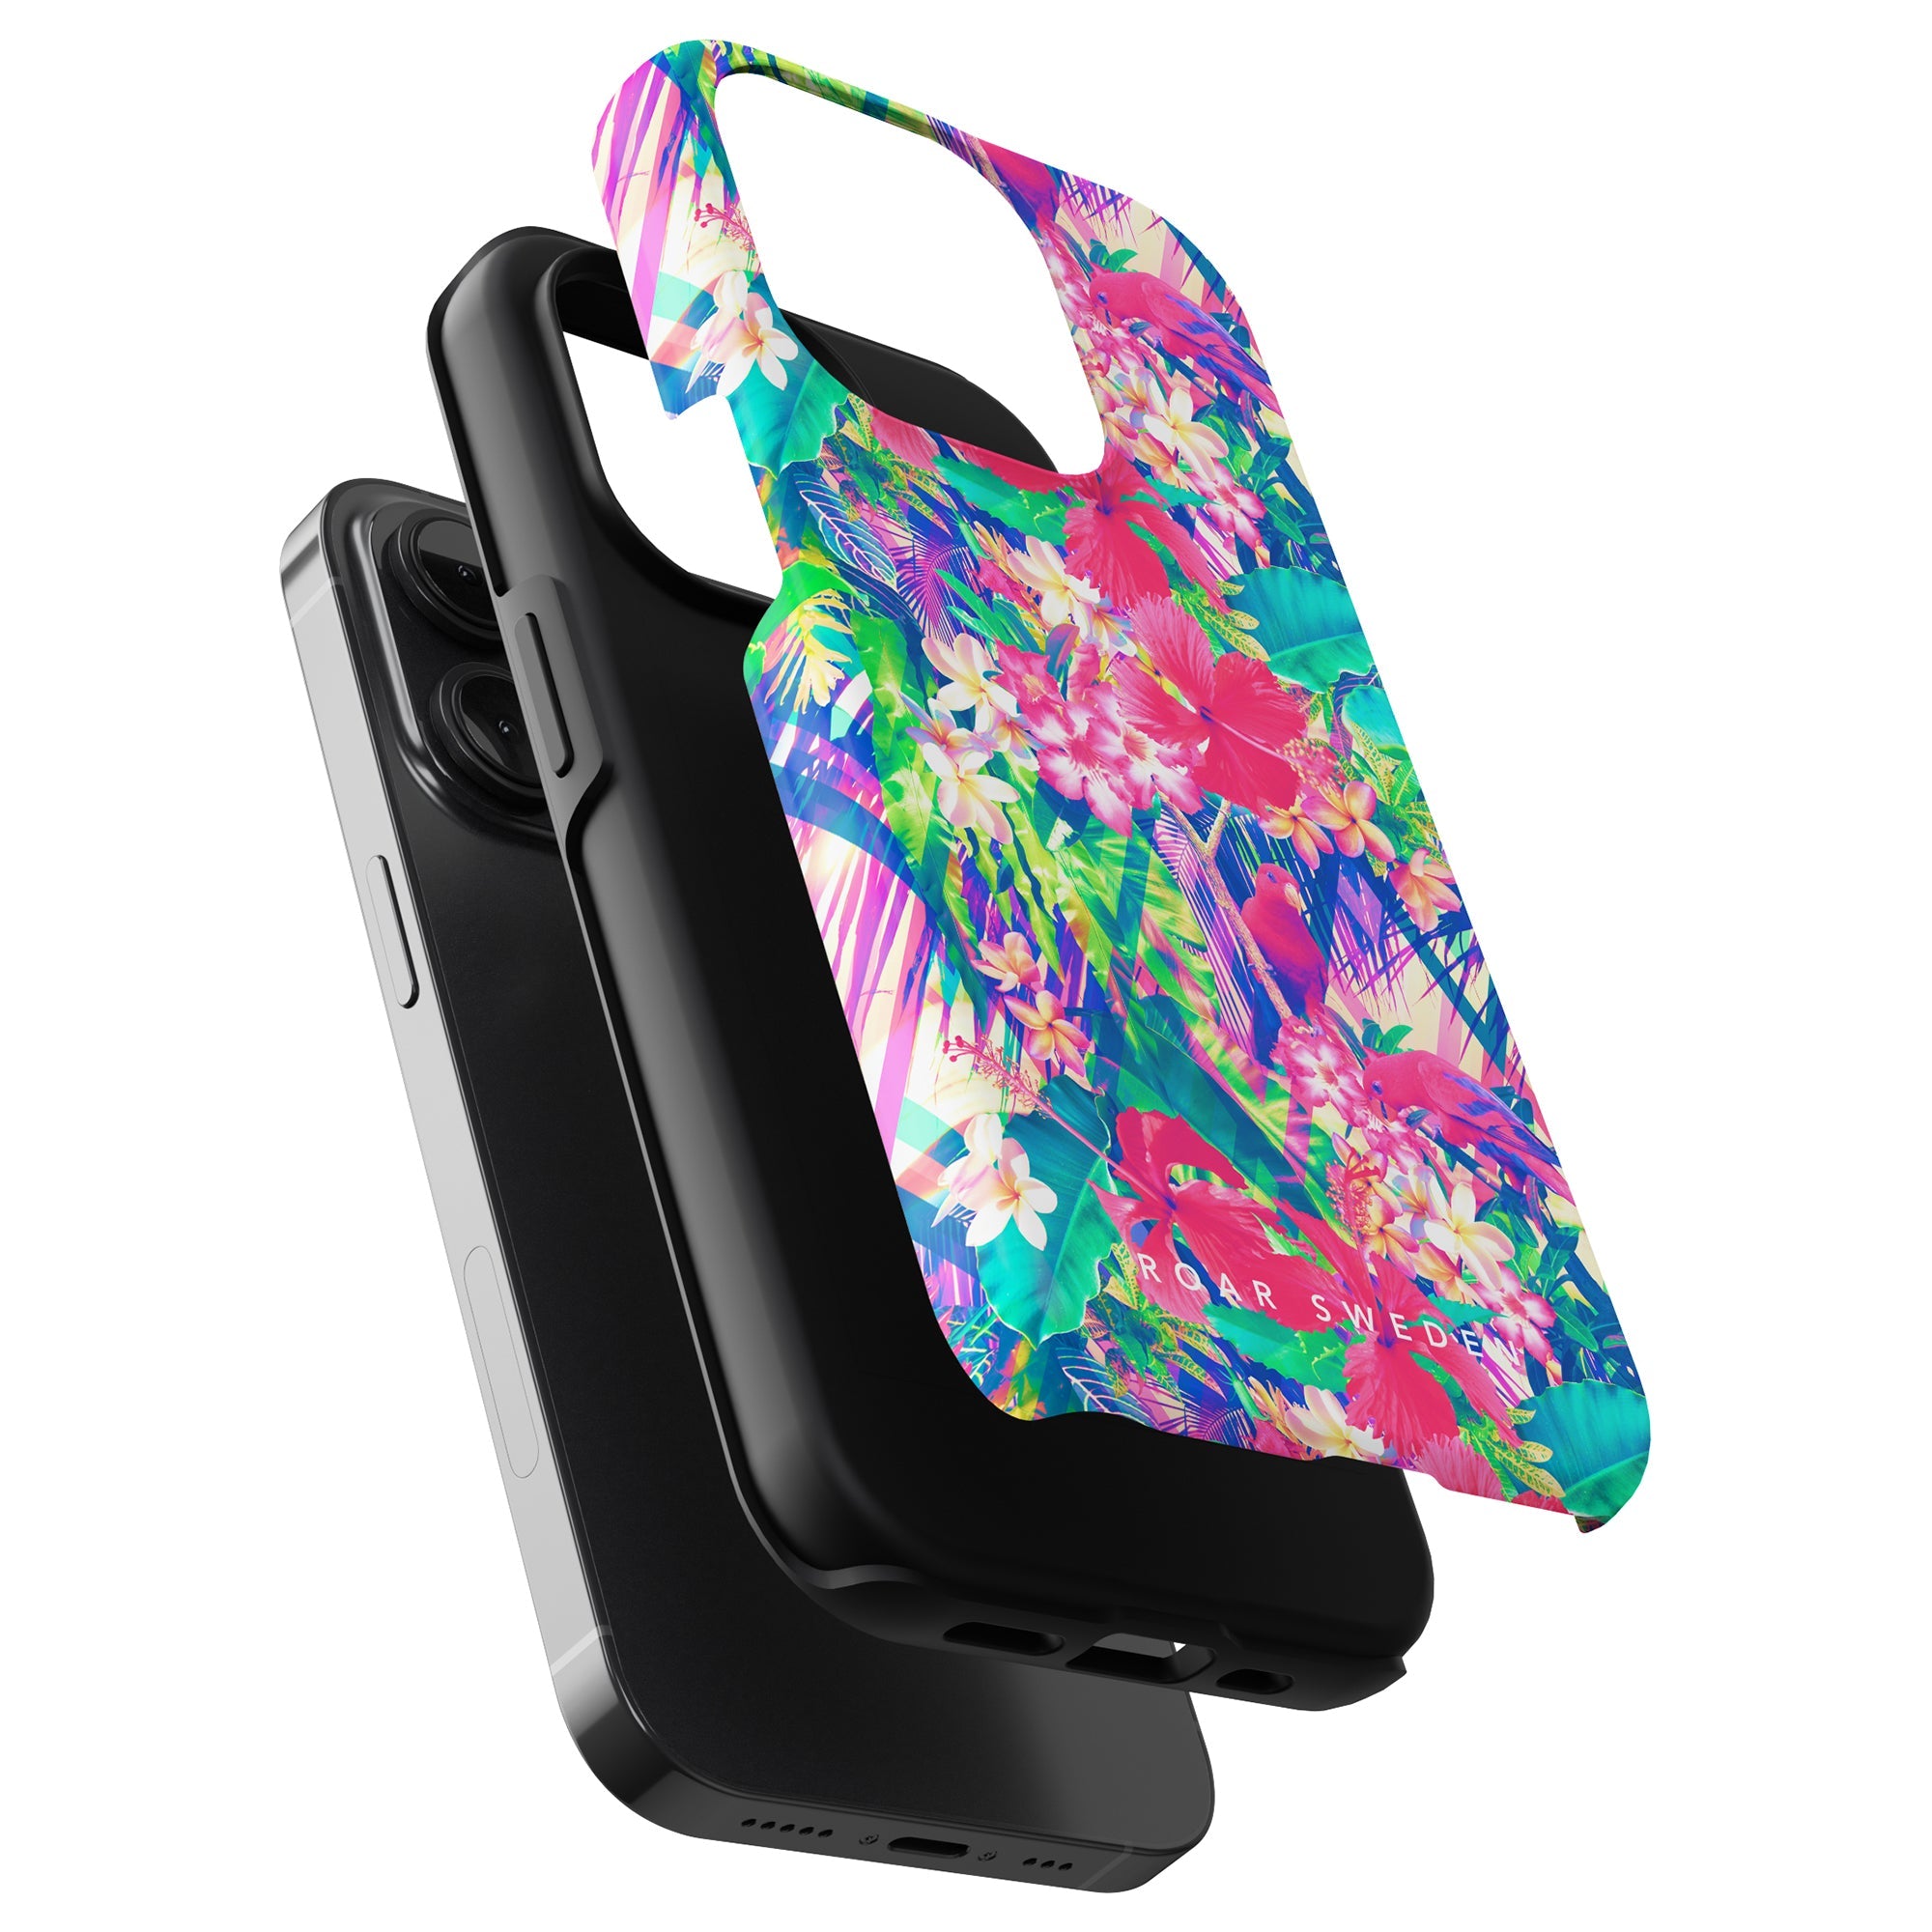 Lilly Pulitzer Lola - Tufft iPhone 11 Pro-fodral.